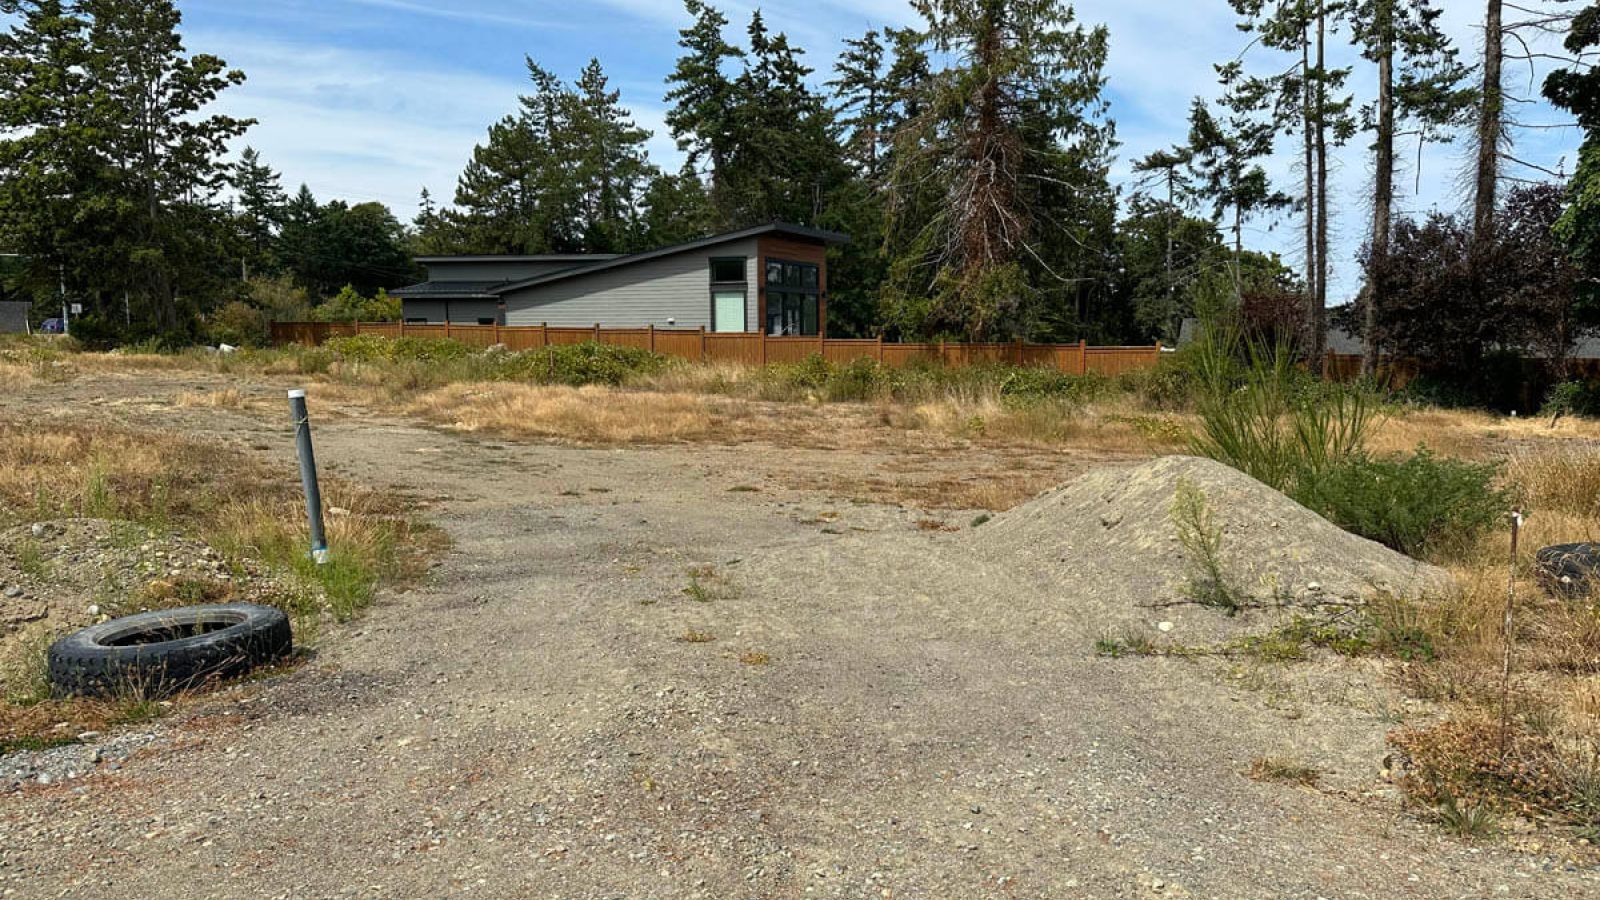 Empty lot photo of Lot 6 of Bayview Estates in French Creek, BC